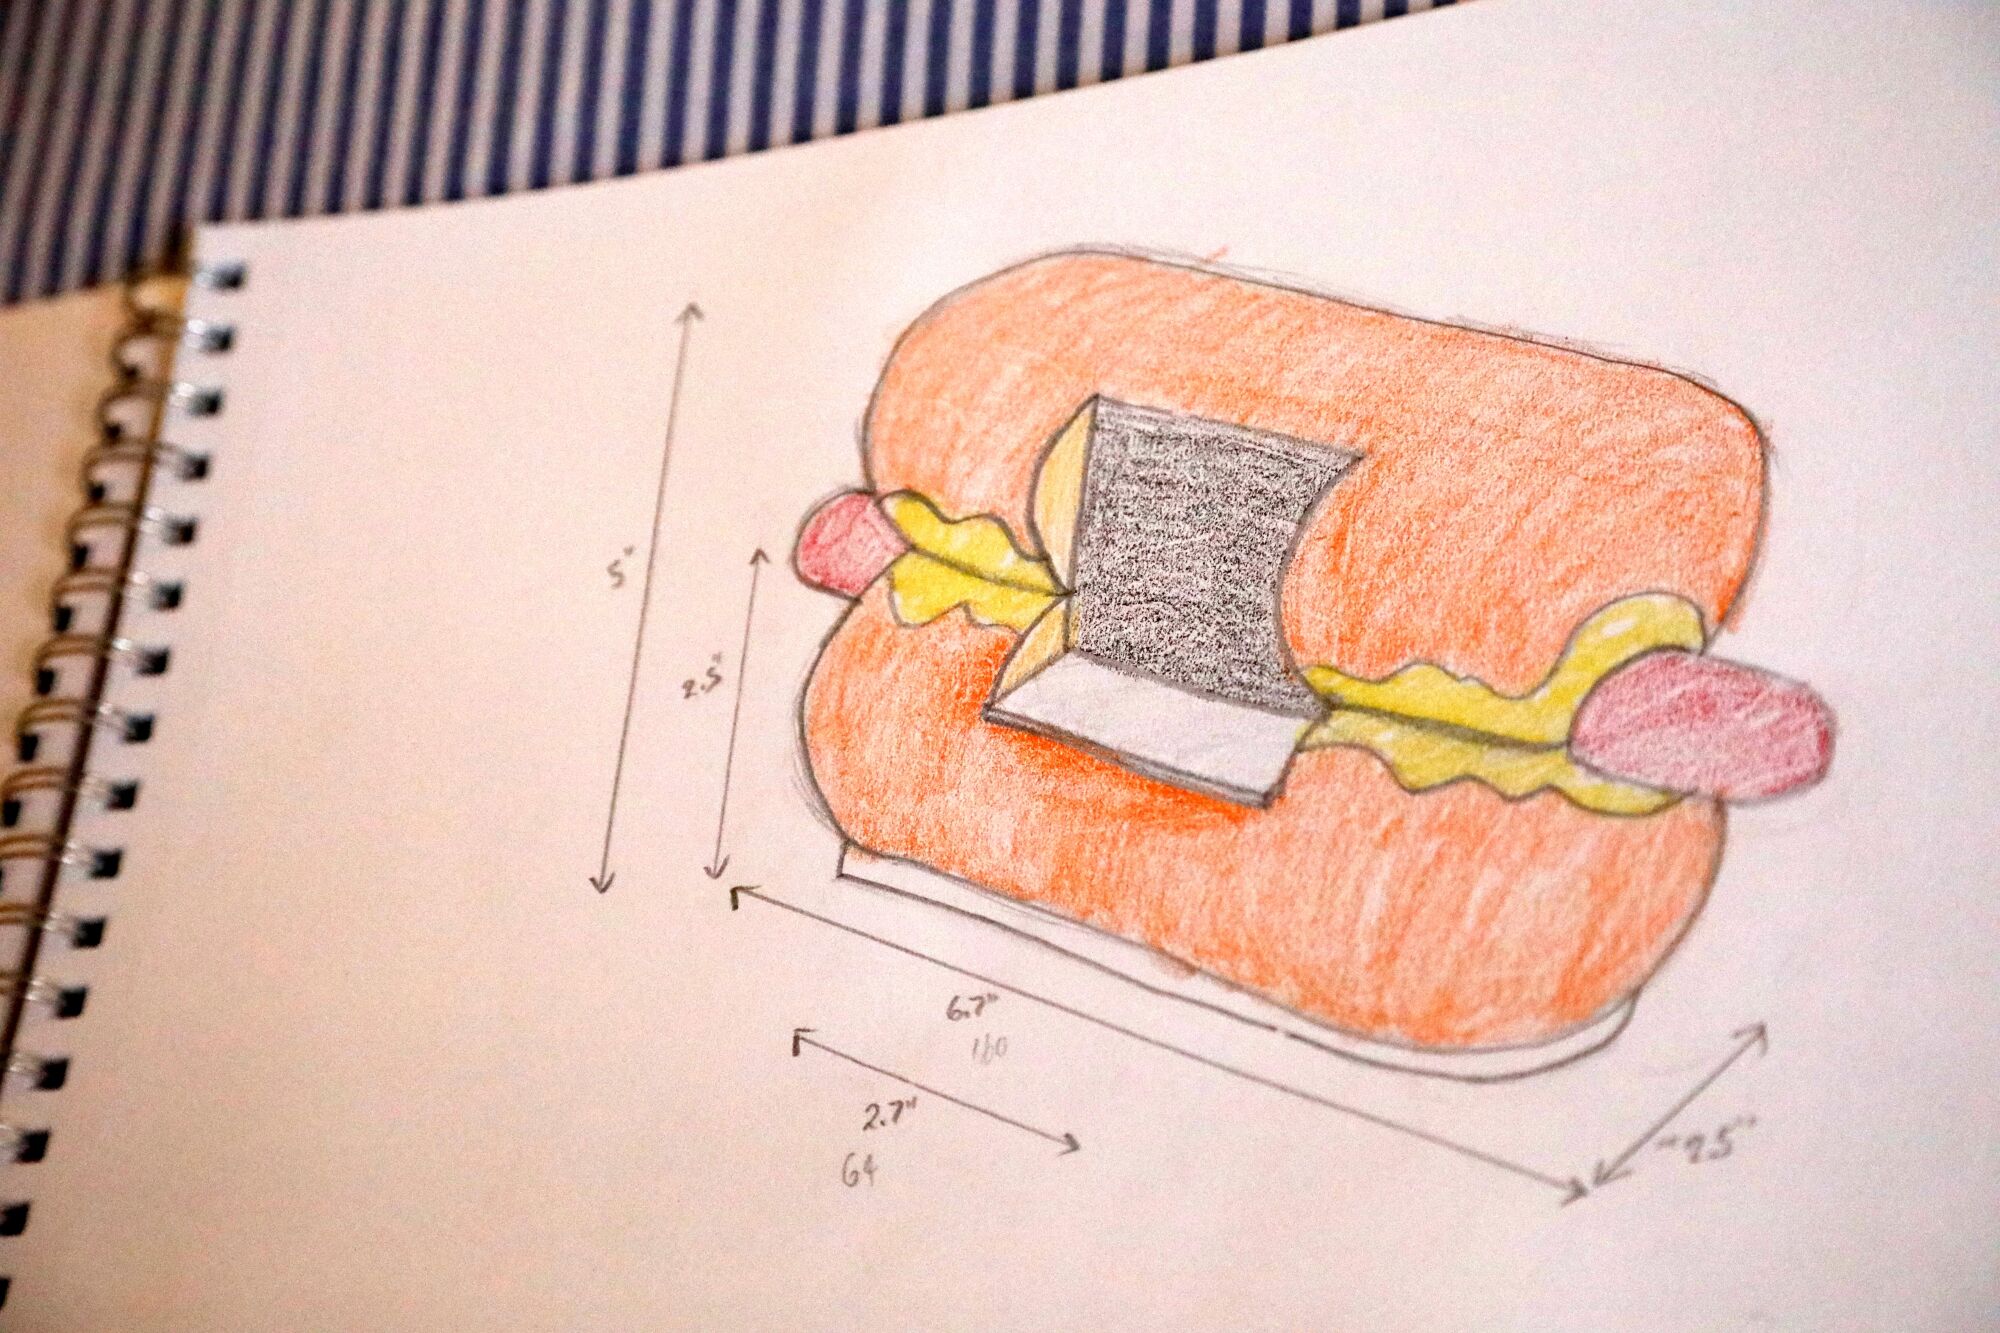 Kieran Wright's sketch for his miniature creation of Tail o' the Pup hot dog stand.